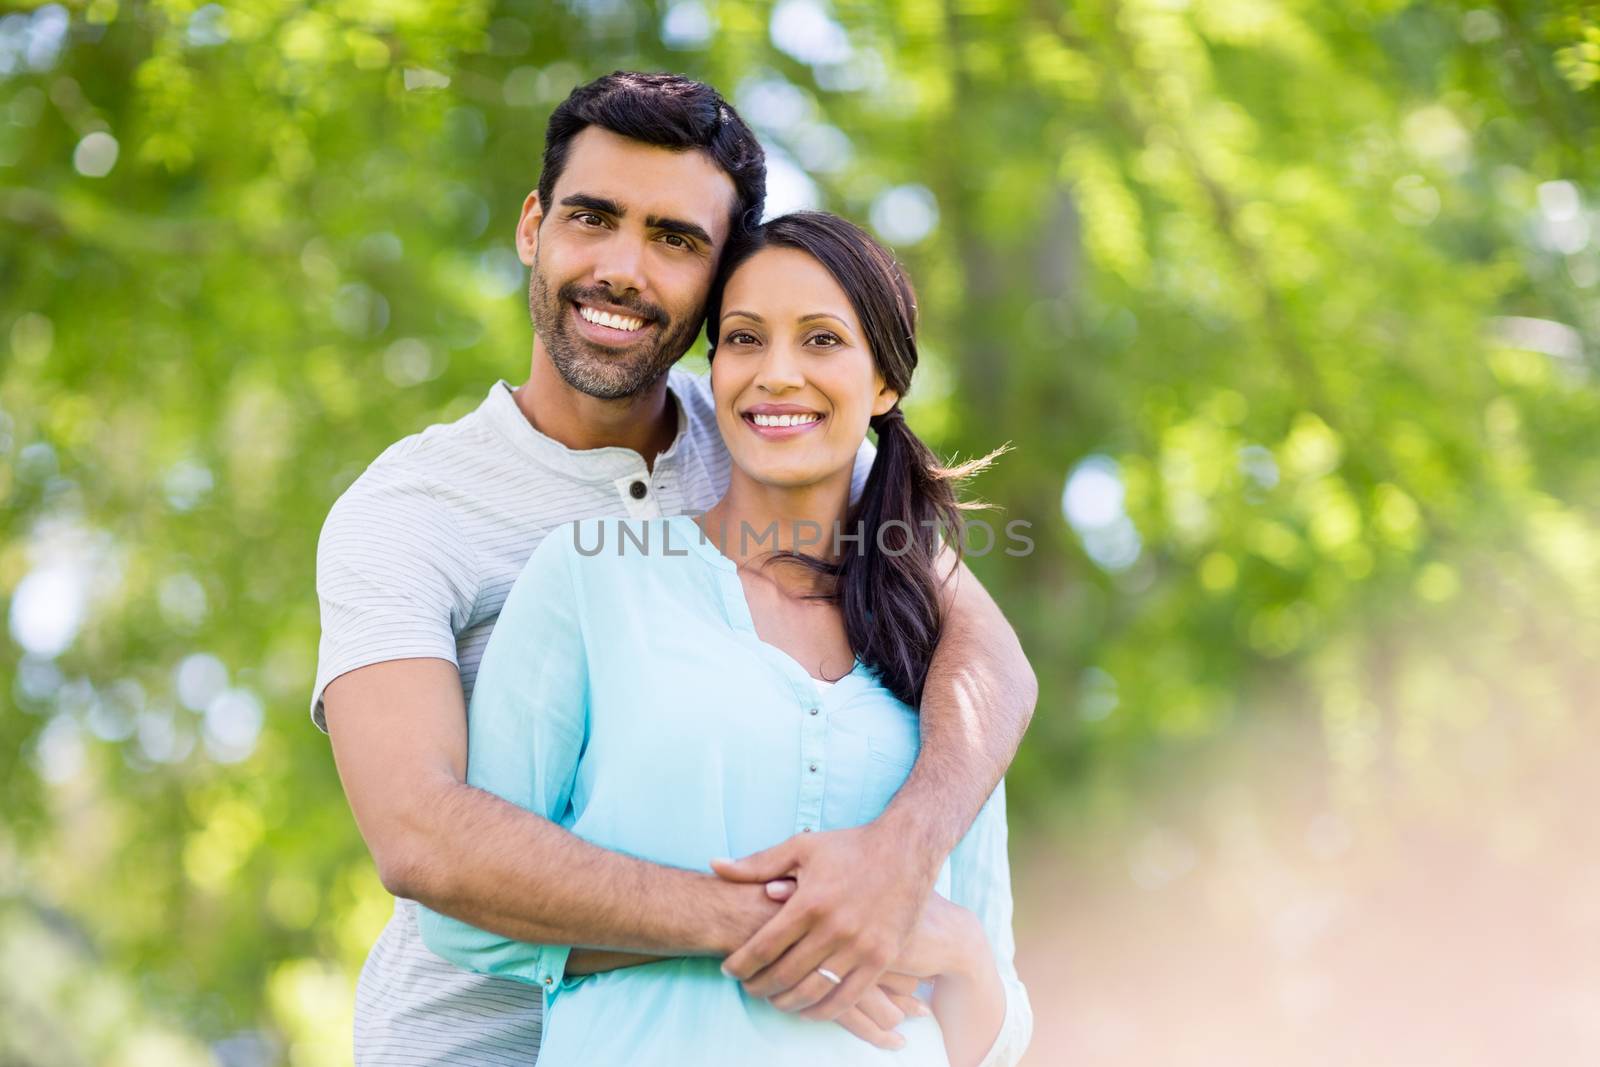 Portrait of romantic couple embracing each other in park